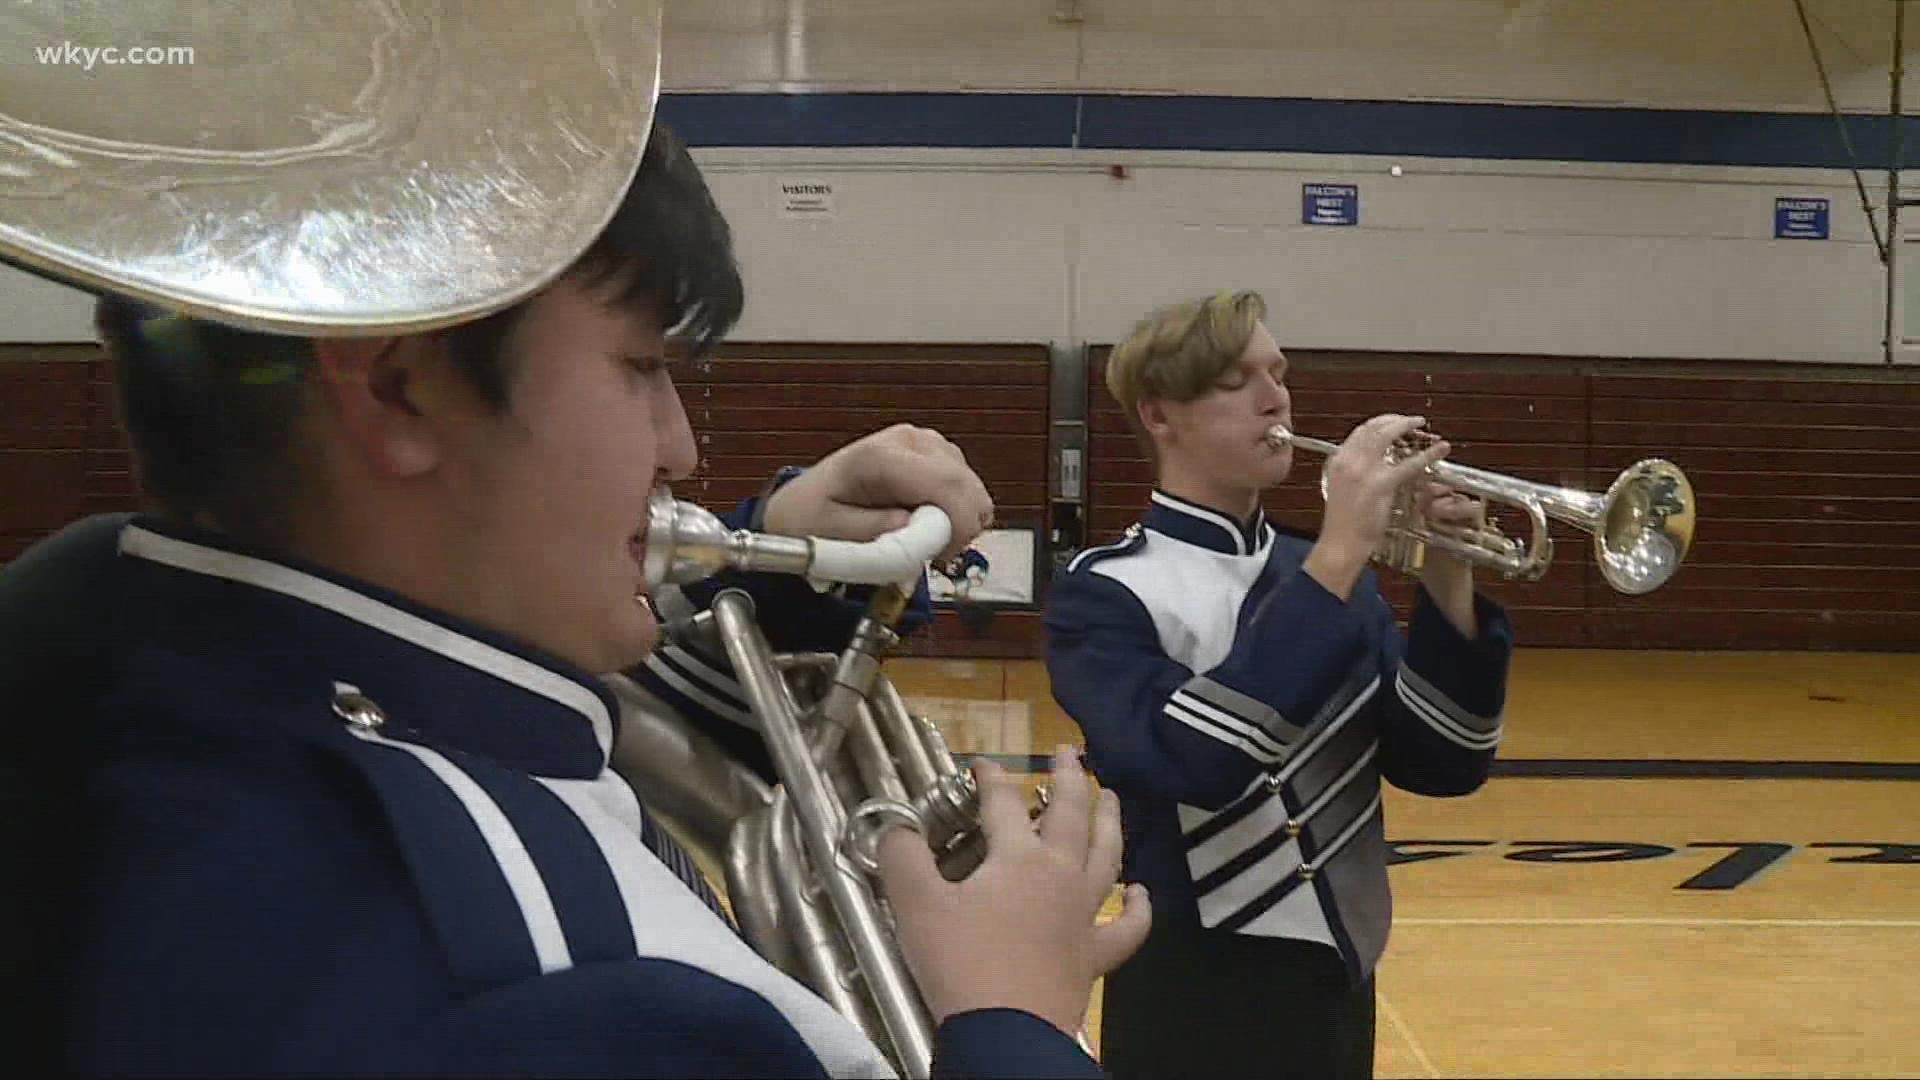 Two Fairless High School seniors will be featured in the Great American Band during the 2021 Macy's Thanksgiving Day Parade in New York City.